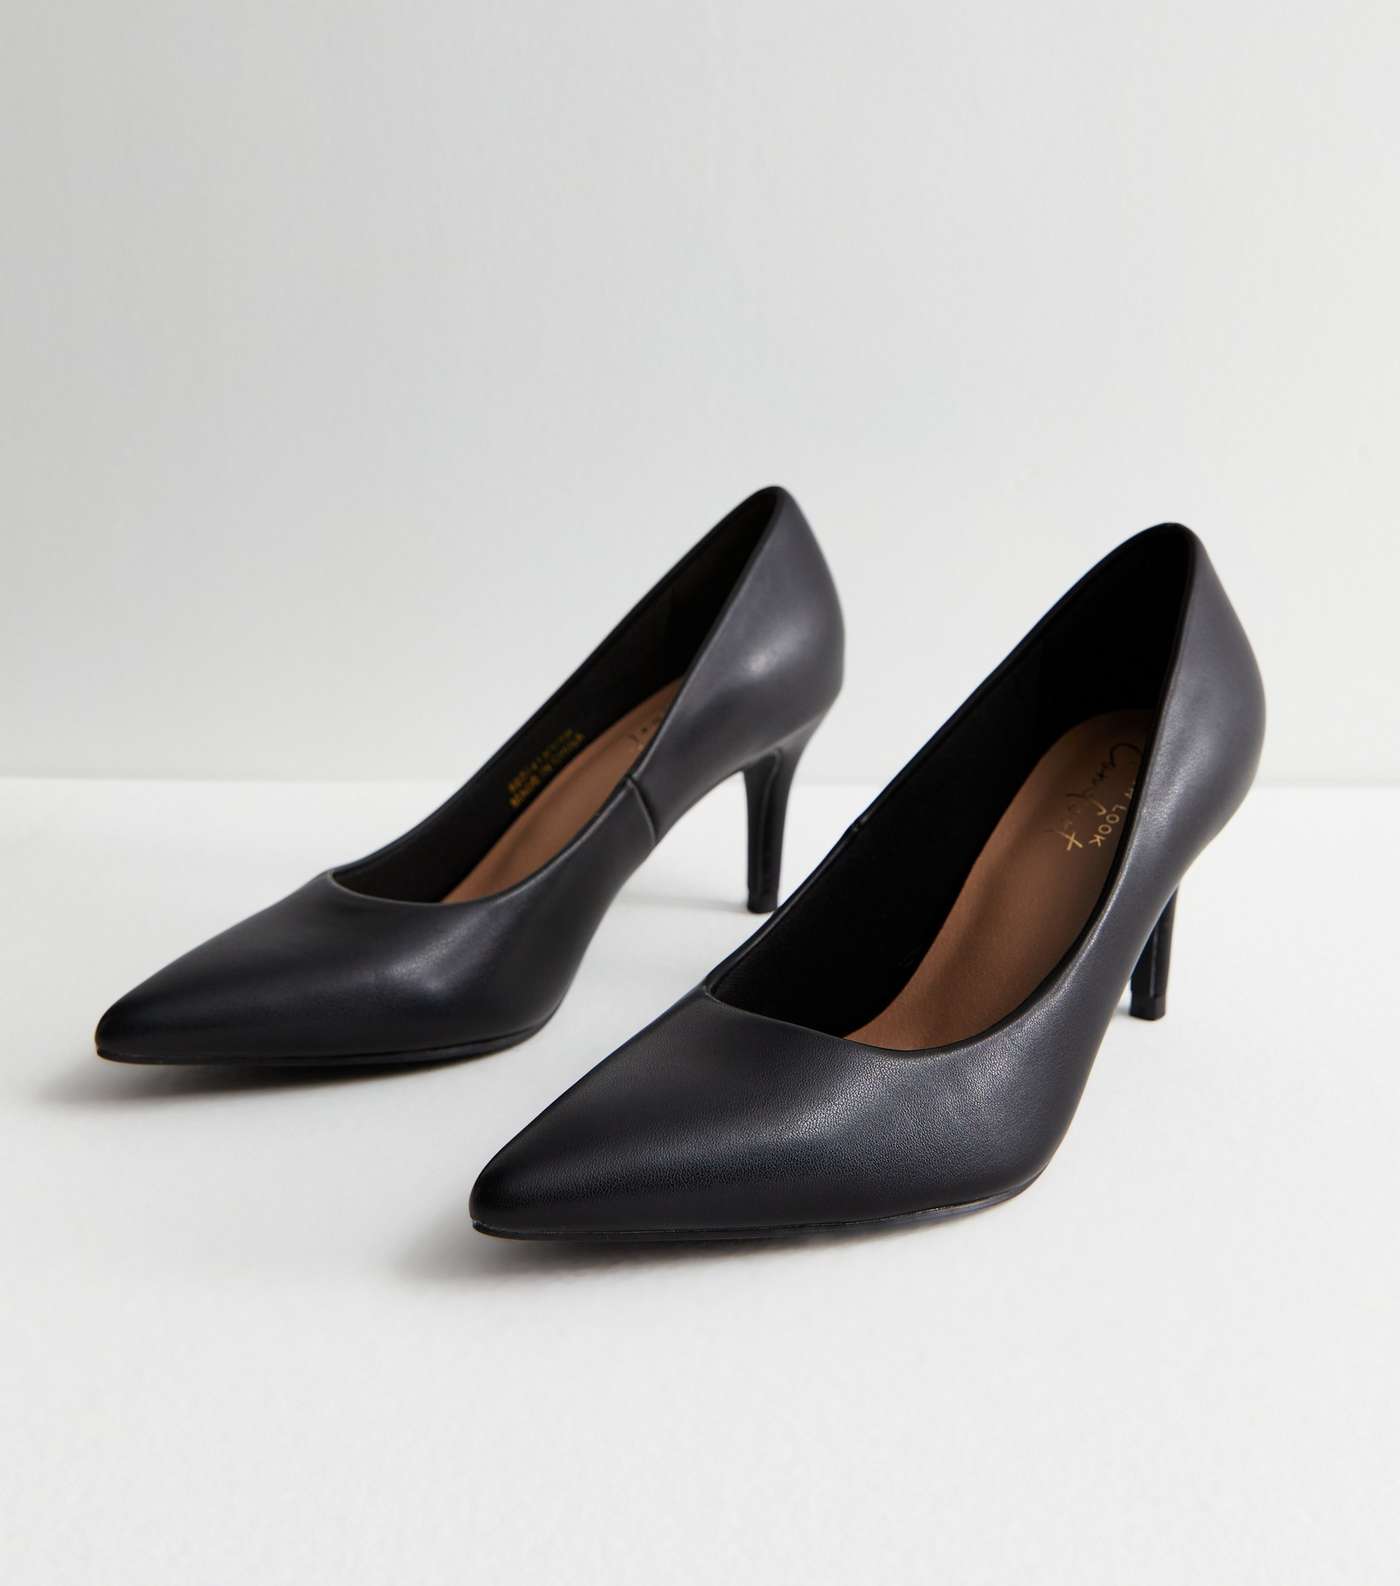 Black Leather-Look Pointed Stiletto Heel Court Shoes Image 3